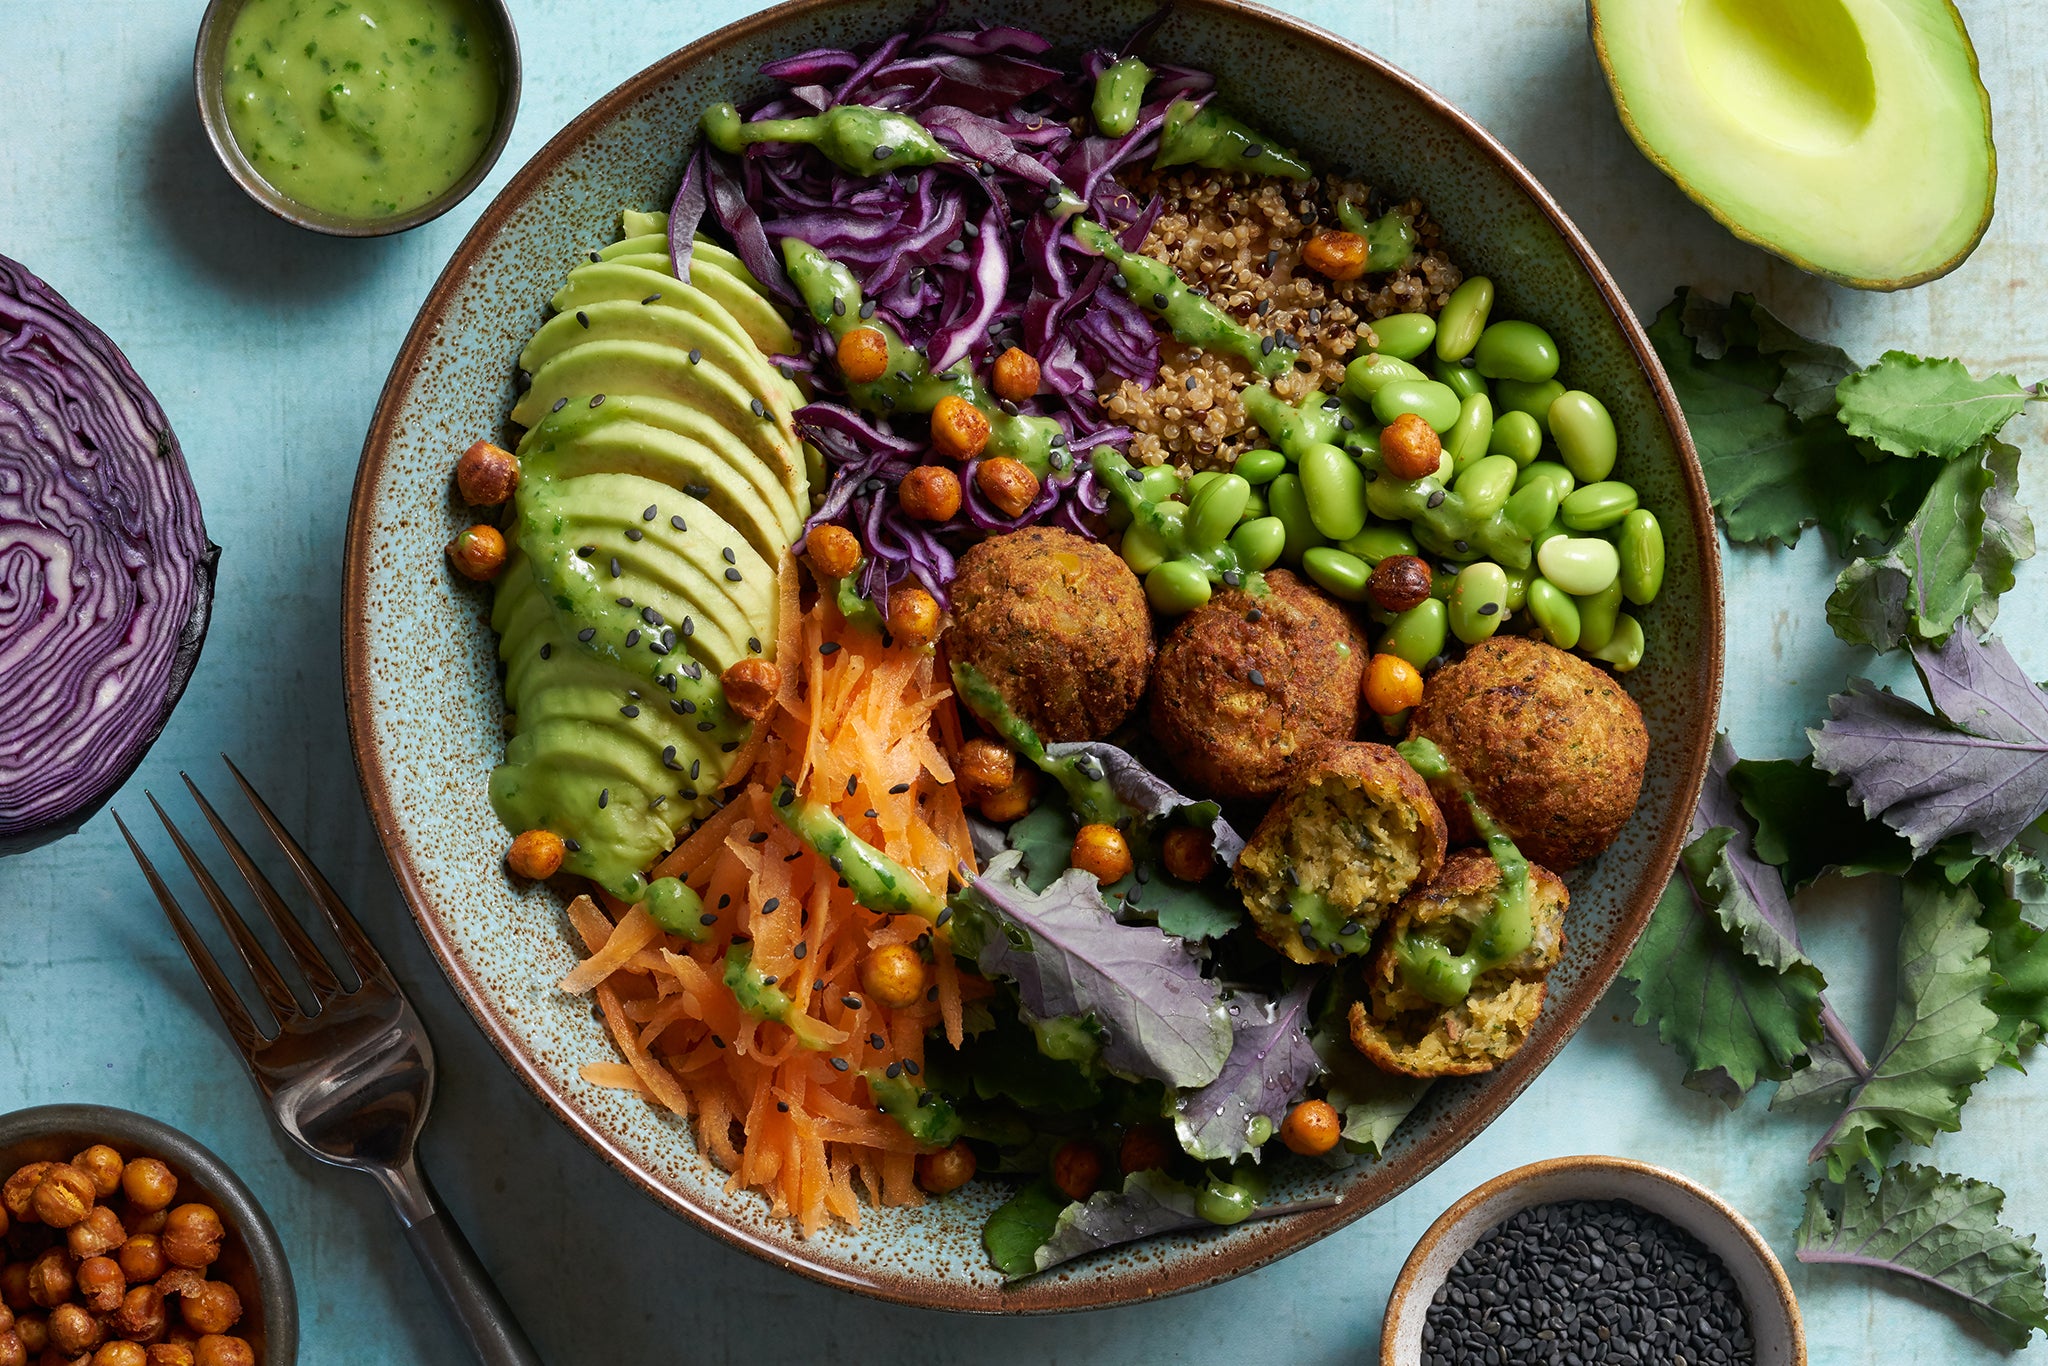 Level up your lunchtime with this light and refreshing vegan buddha bowl